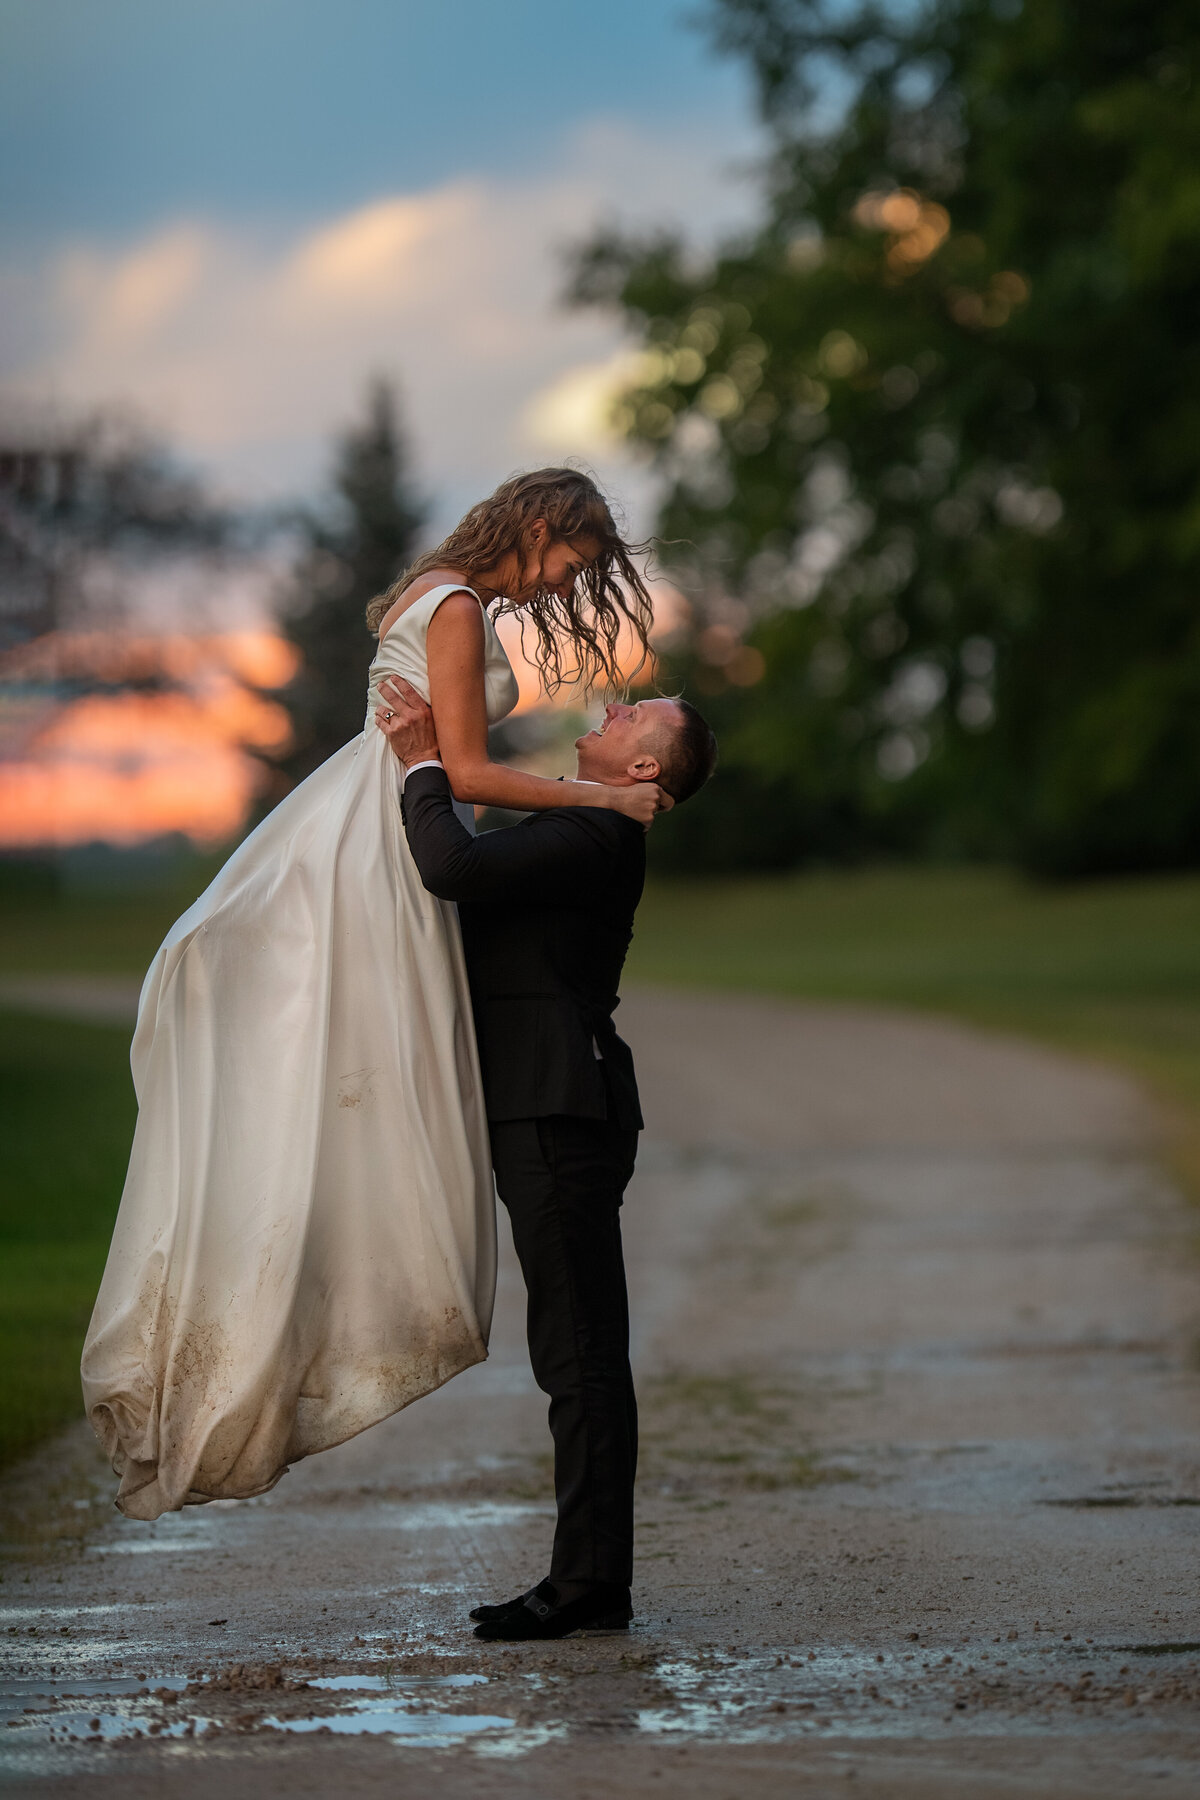 Happy newlyweds having fun in the rain on their wedding day during sunset